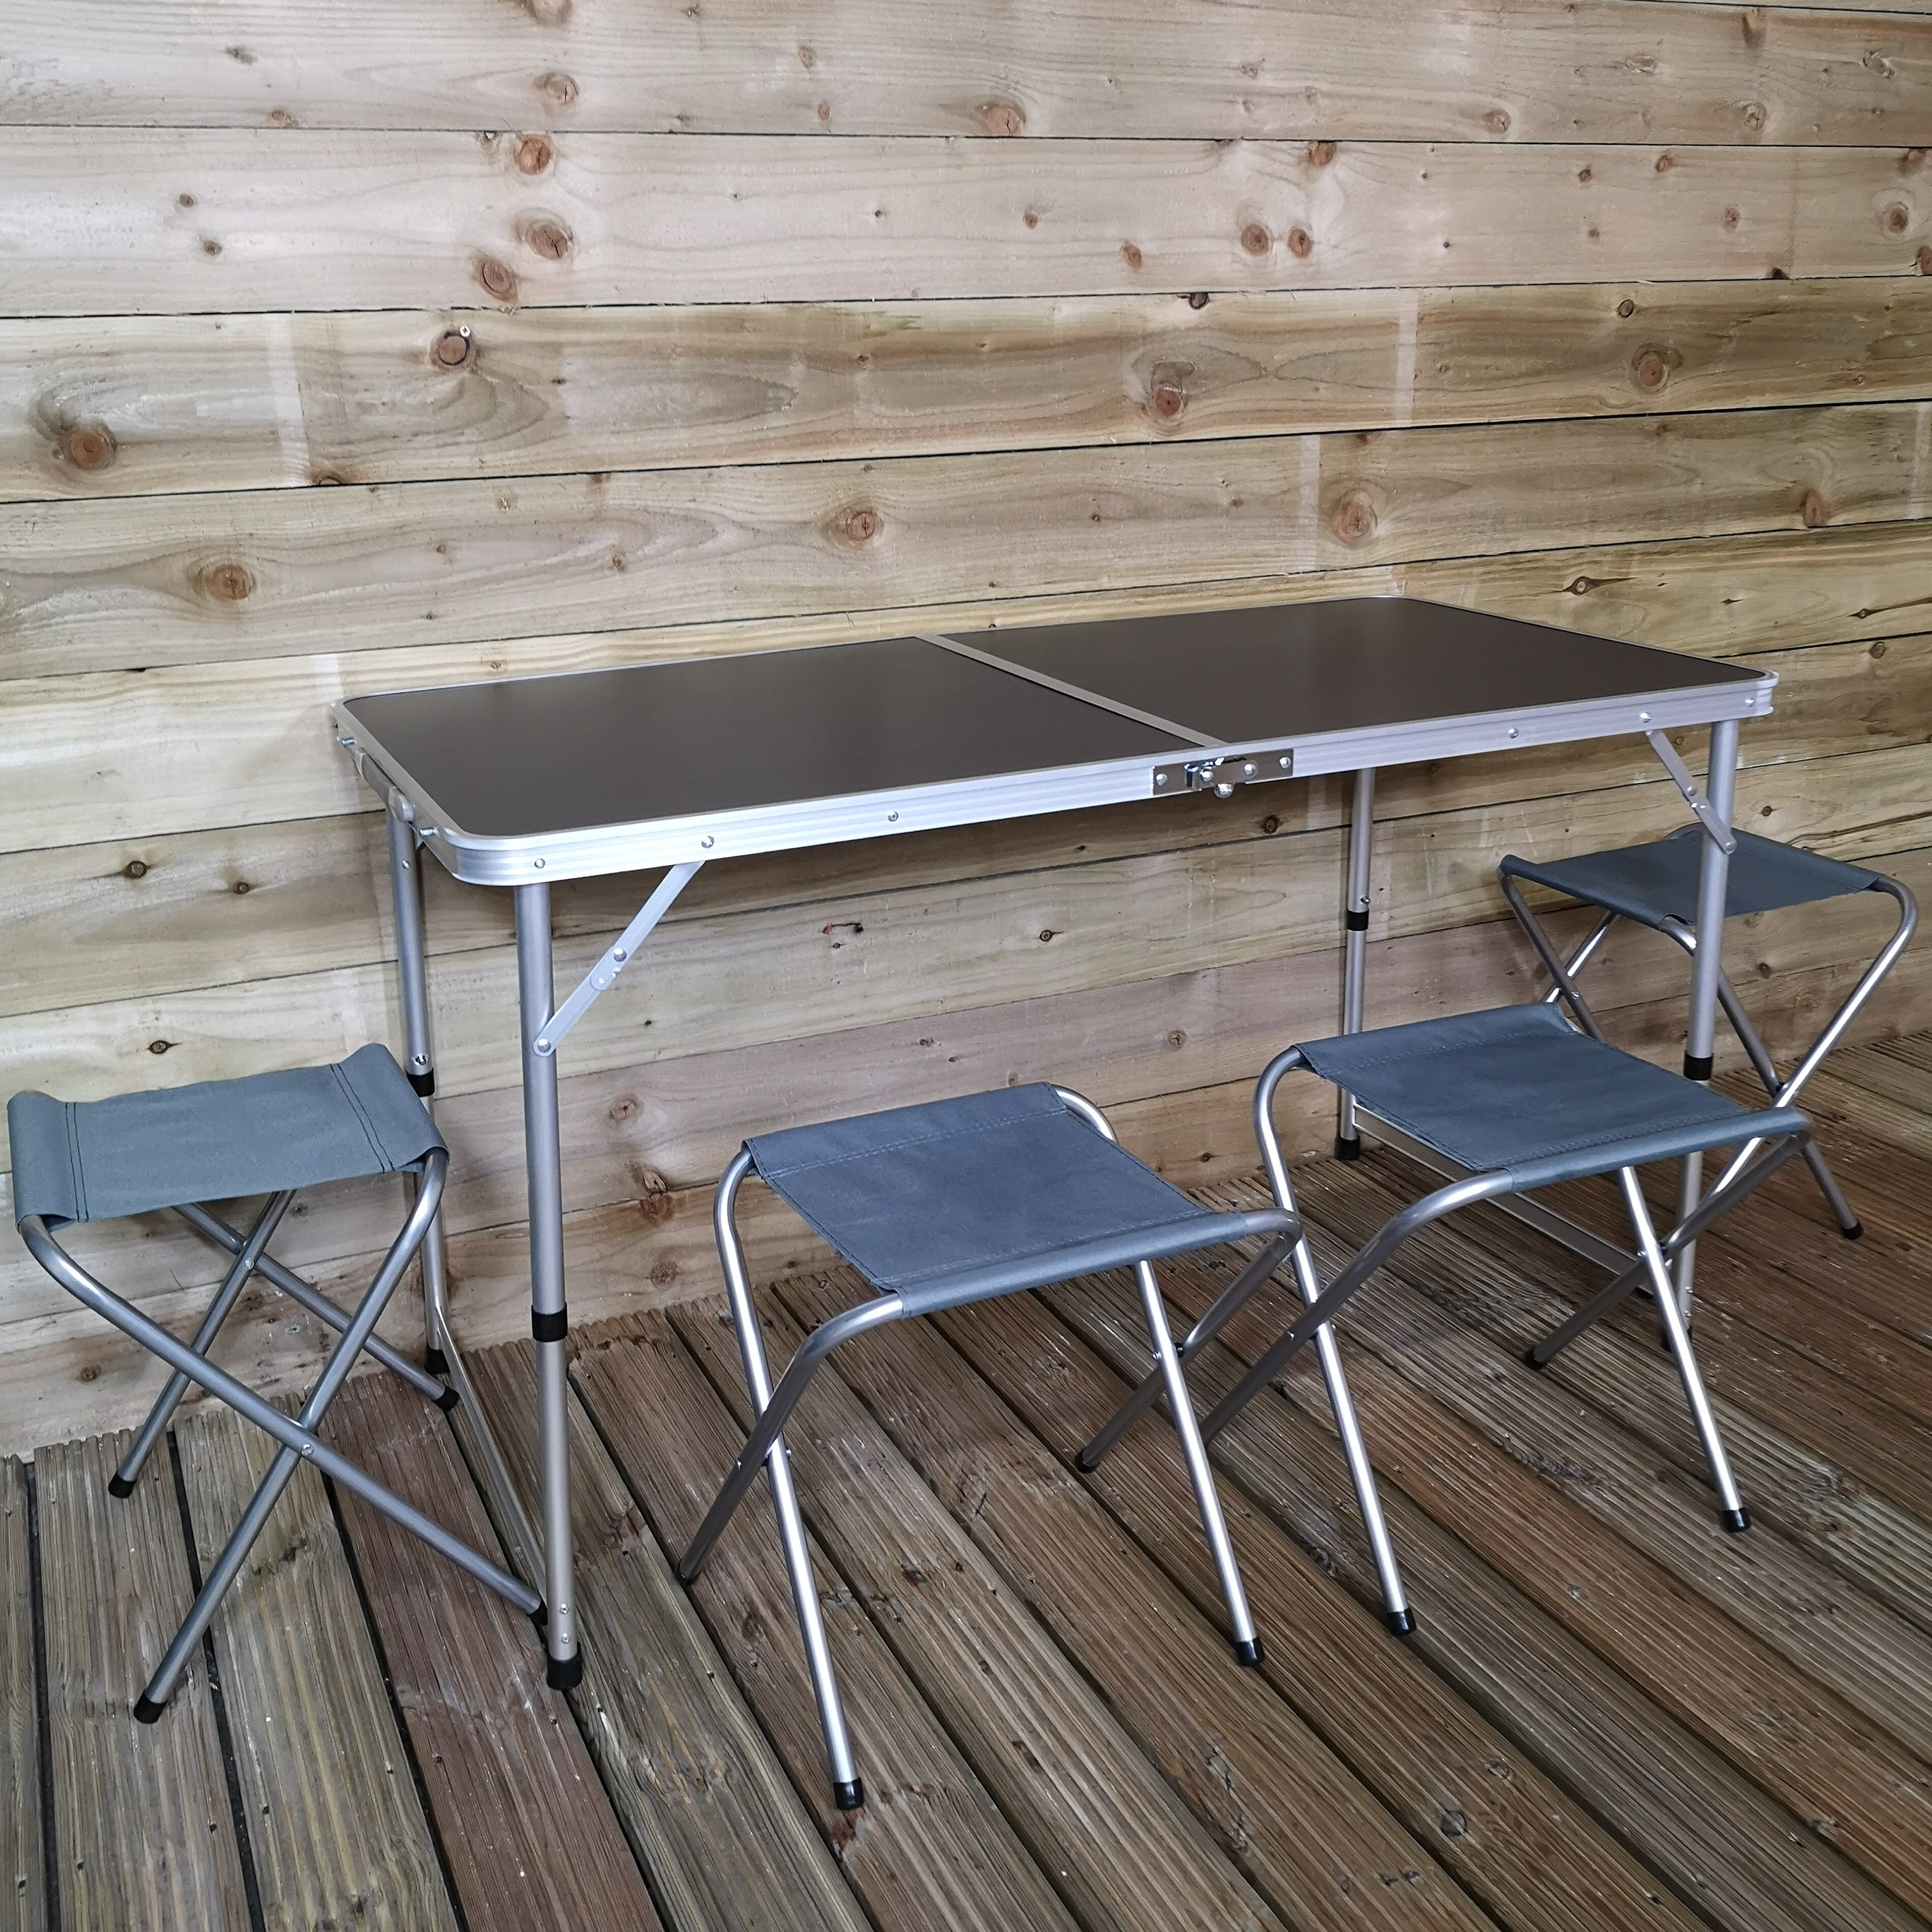 5pc Folding Camping Table & Chair Set in Grey for Indoor or Outdoor Use